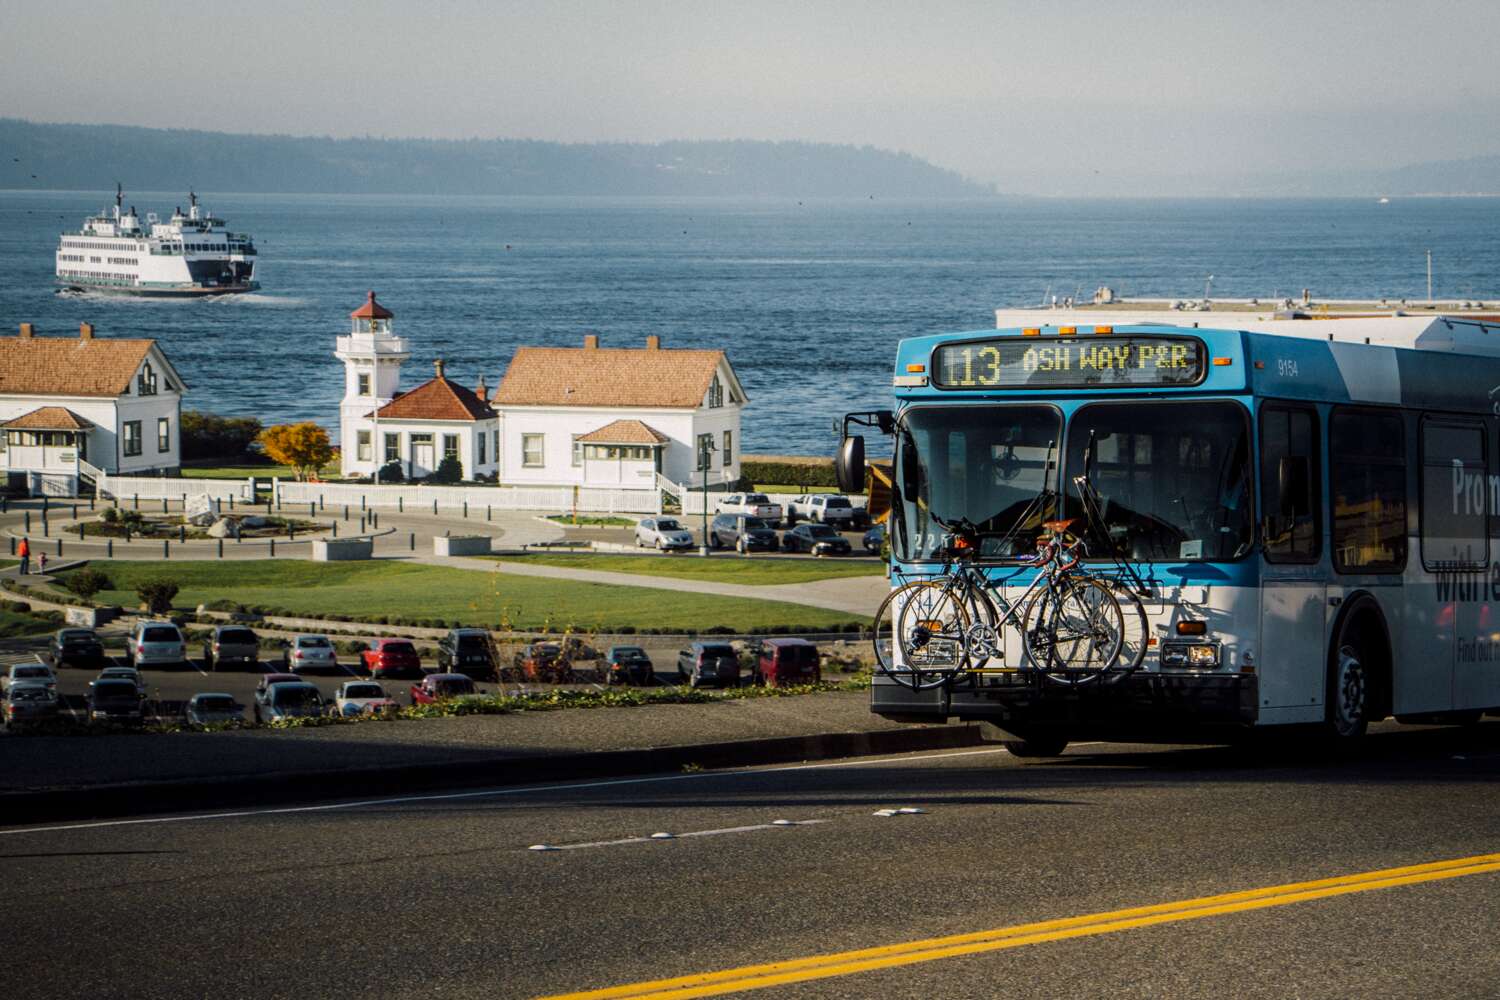 Community Tranist Bus with a ferry in the background